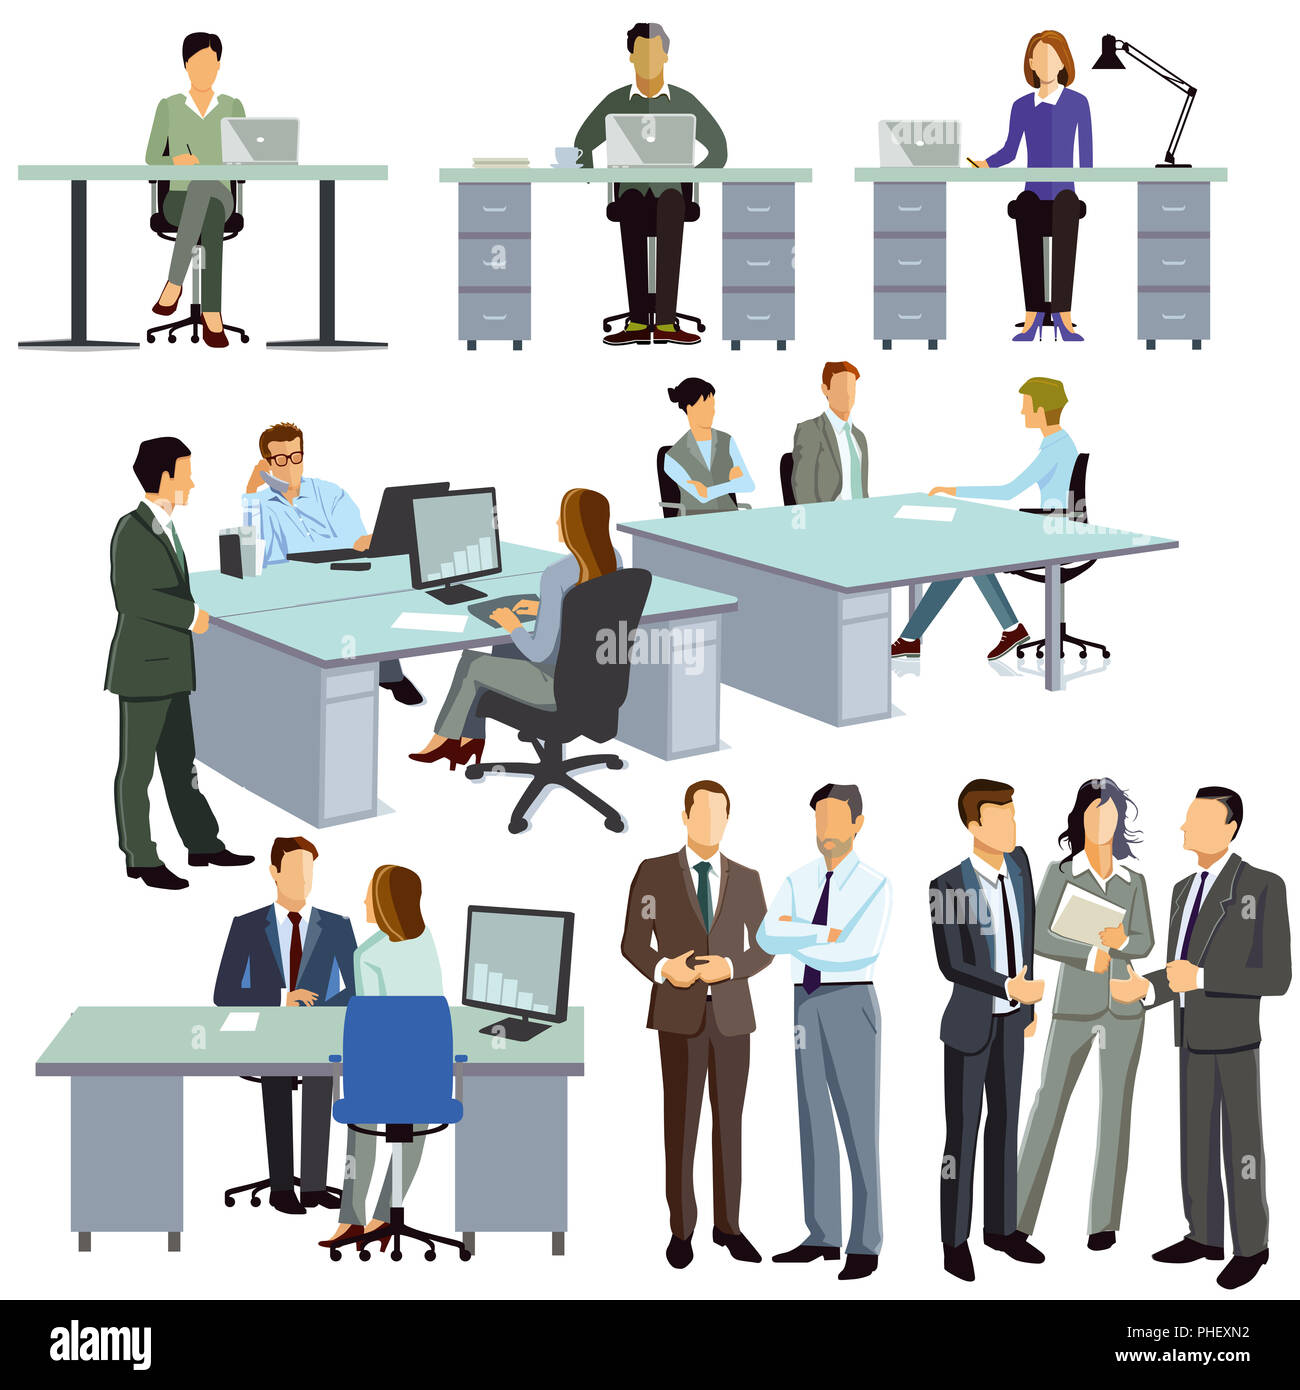 Cooperation in the office and company Stock Photo